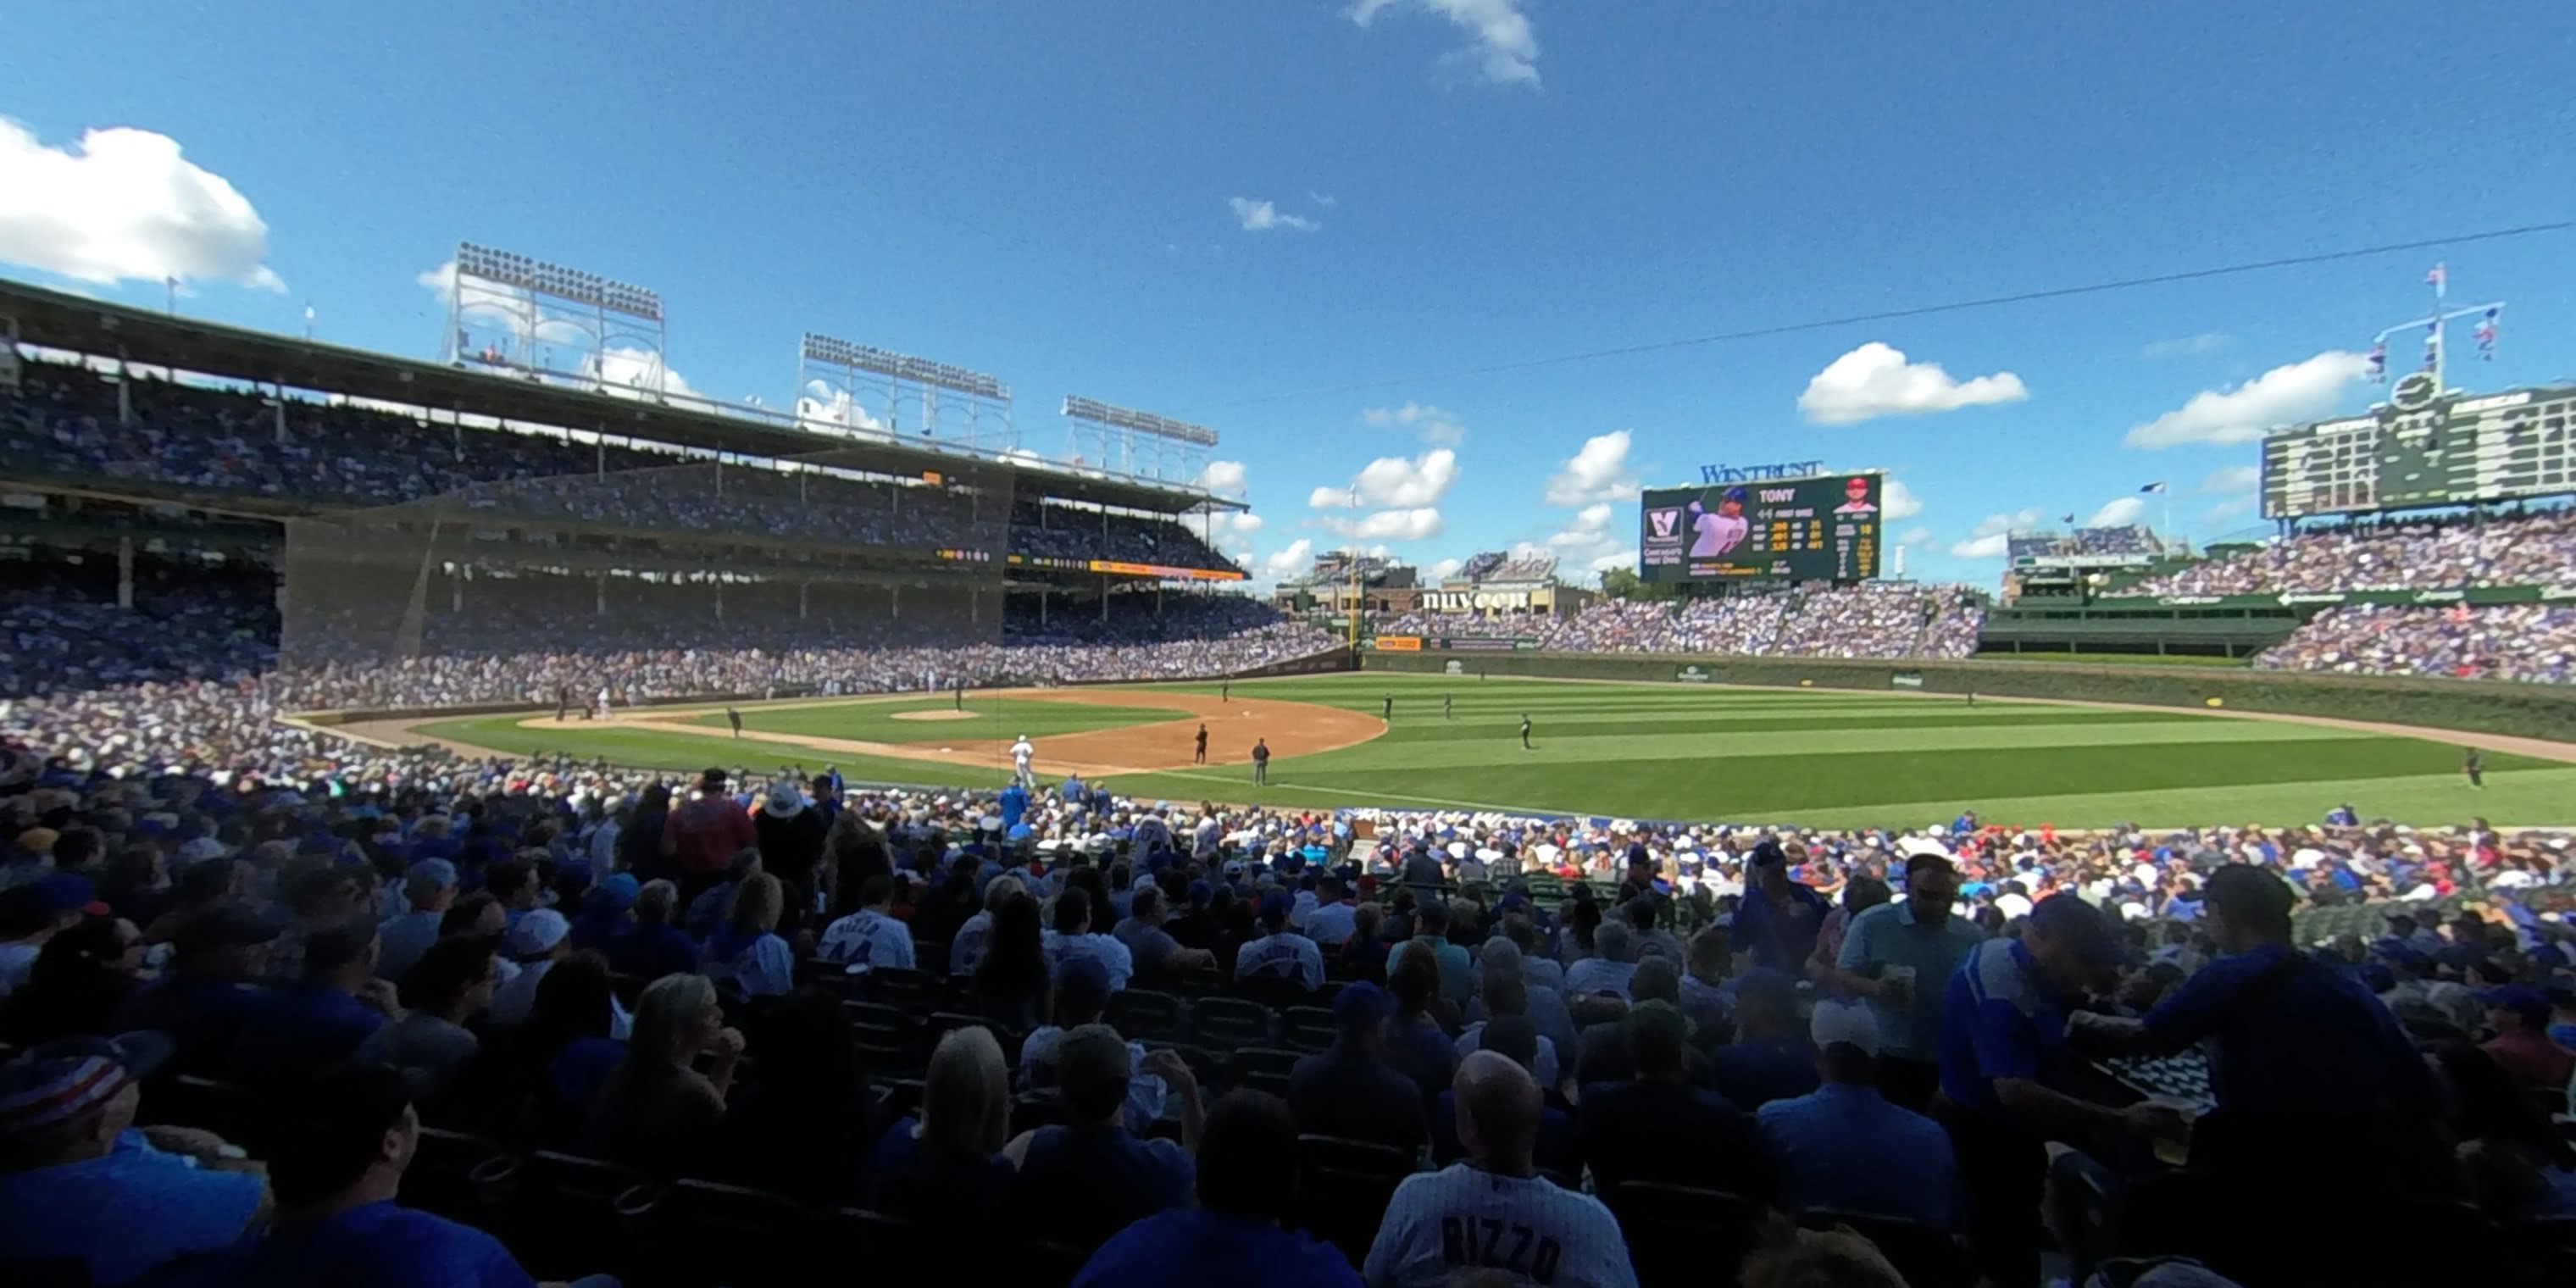 section 128 panoramic seat view  for baseball - wrigley field